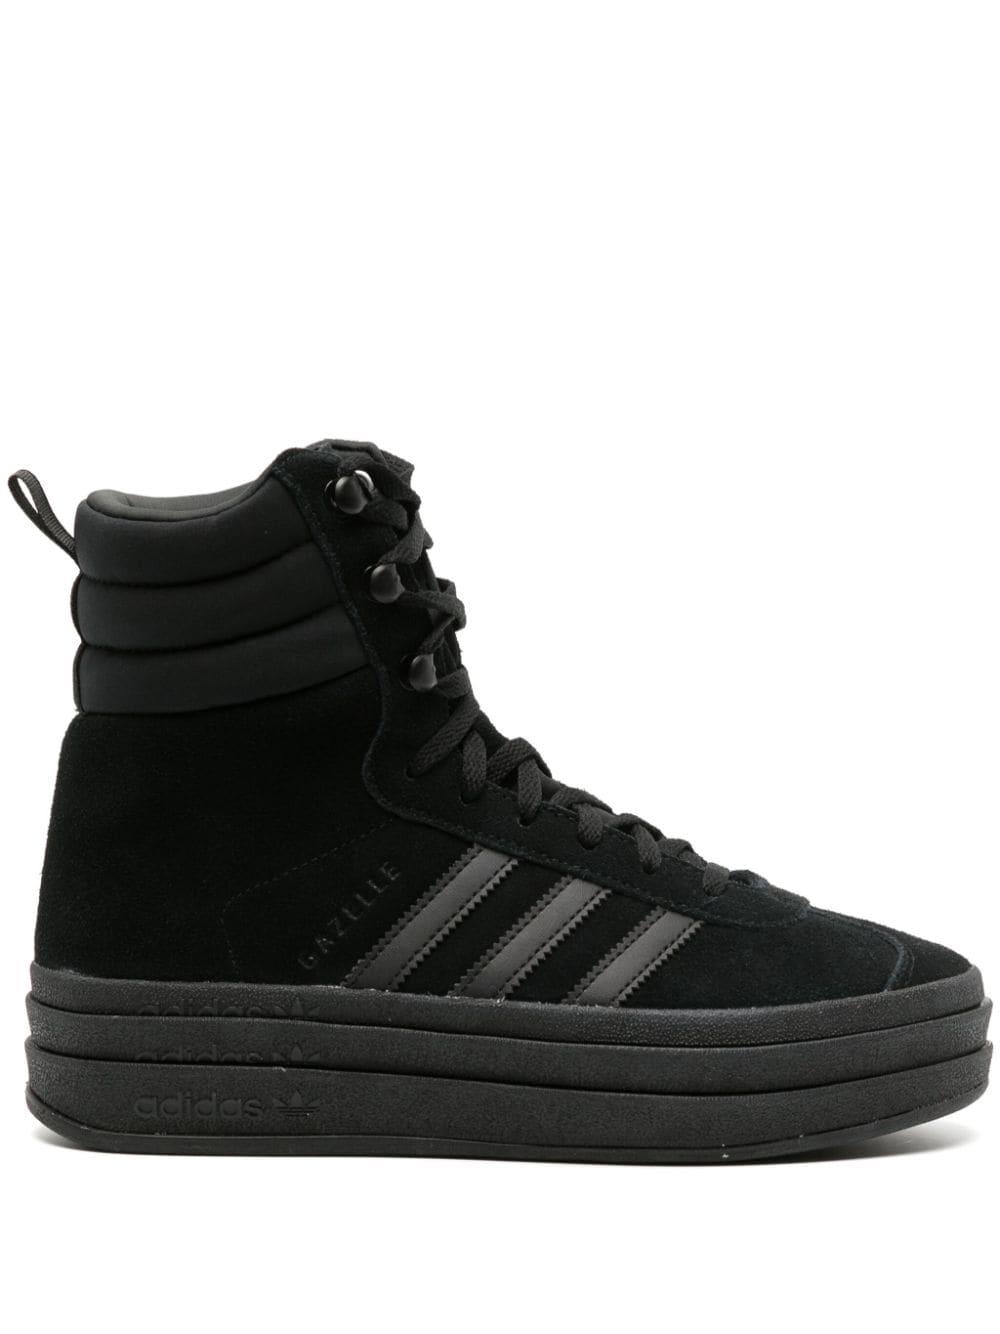 adidas Gazelle 3-stripes Padded-ankles Sneakers in Black | Lyst